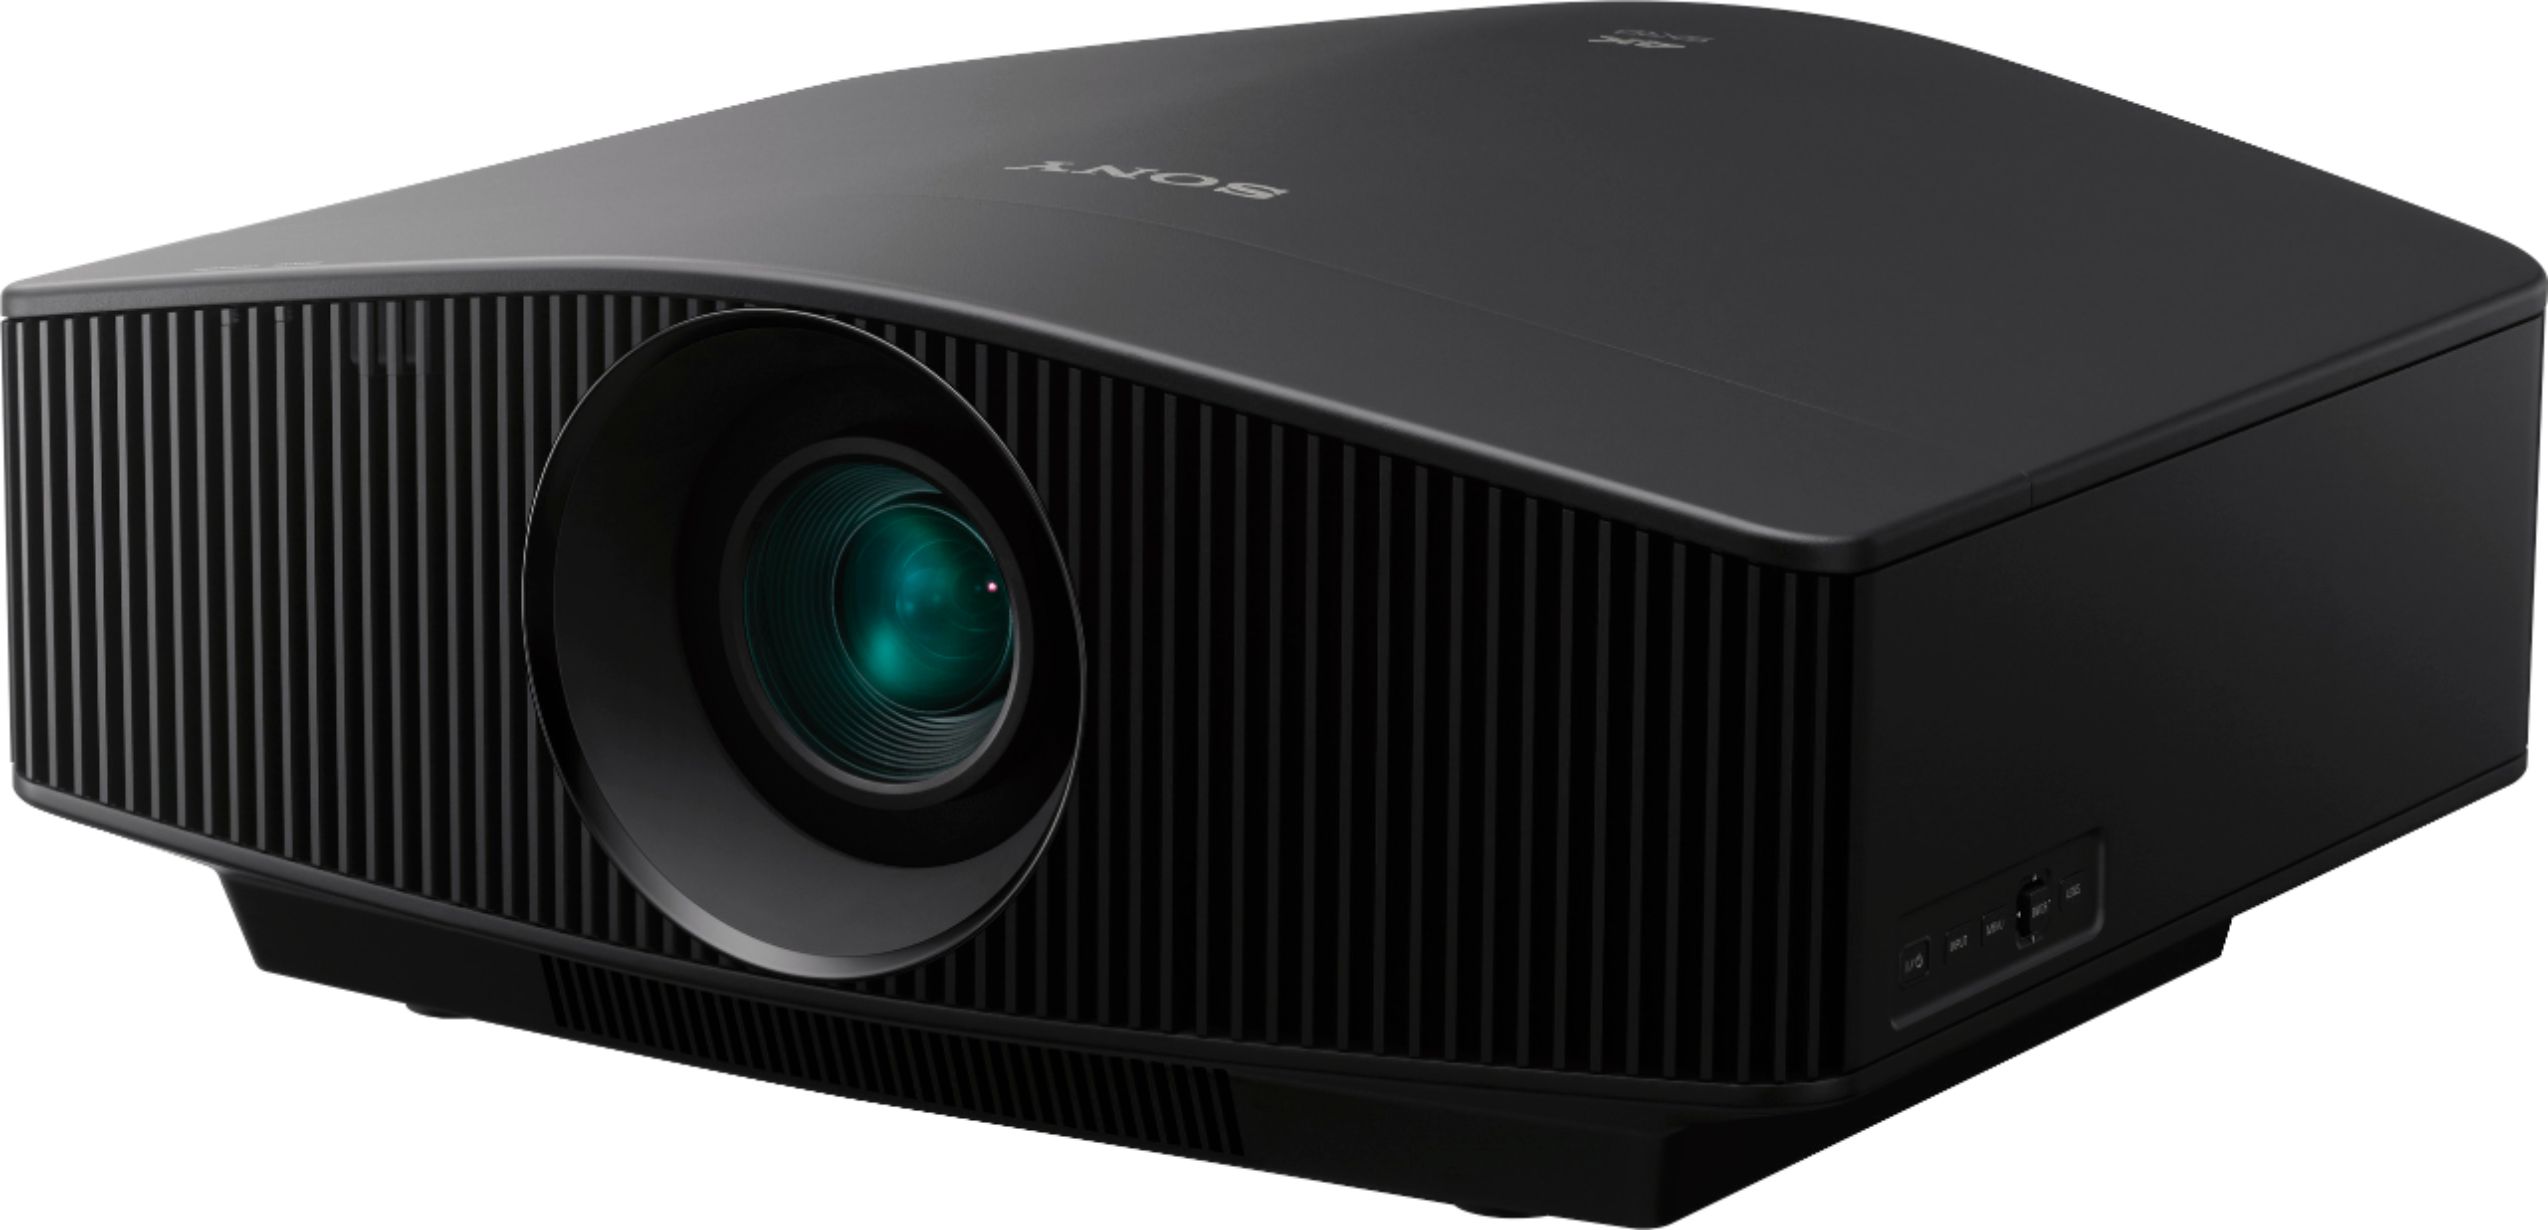 Angle View: Sony - 4K HDR Laser Home Theater Projector - Black